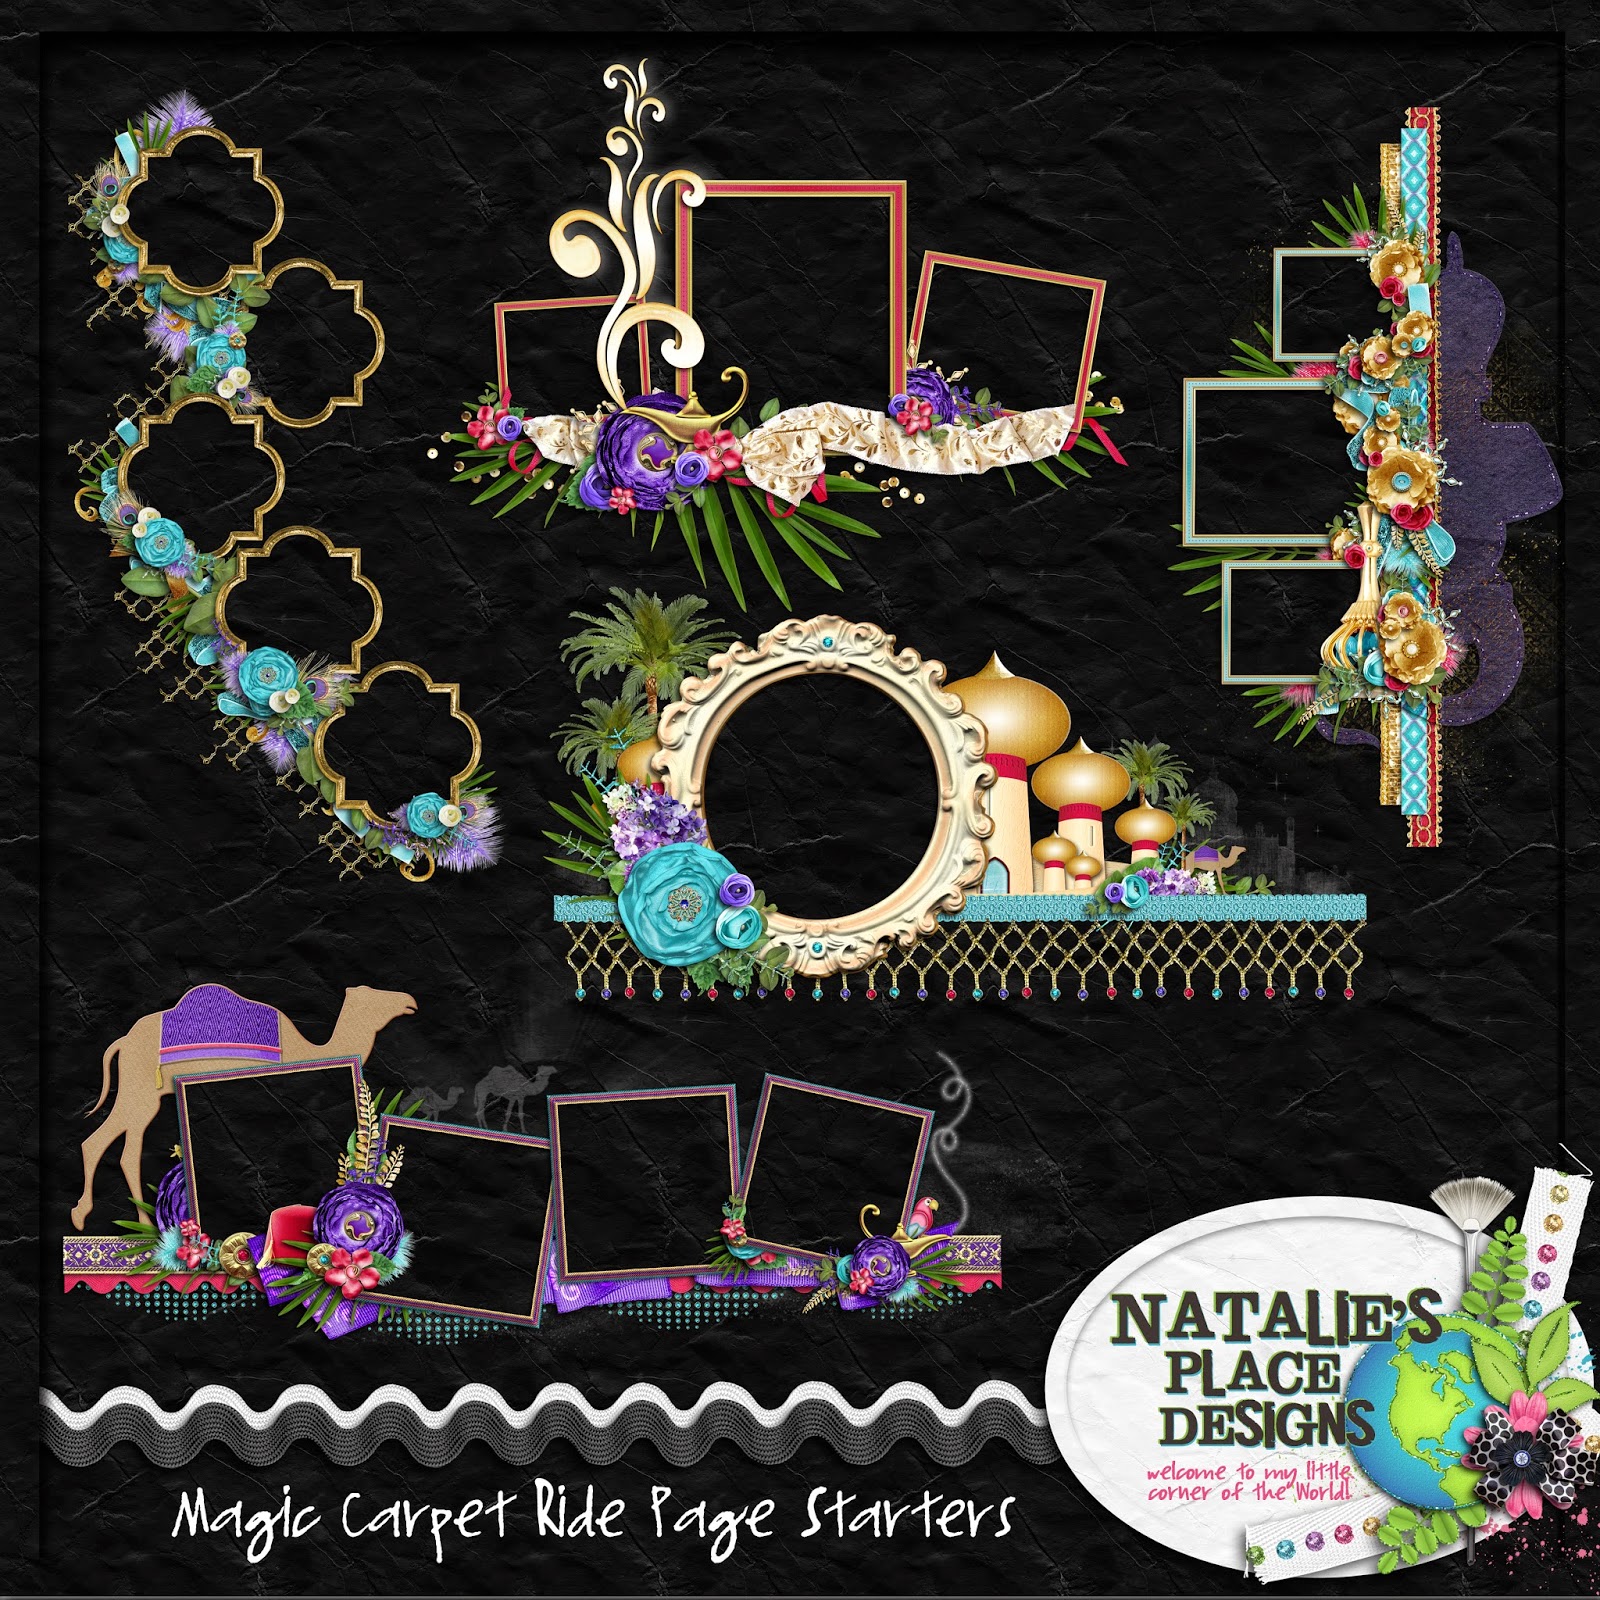 http://www.nataliesplacedesigns.com/store/p480/Magic_Carpet_Ride_Page_Starters.html